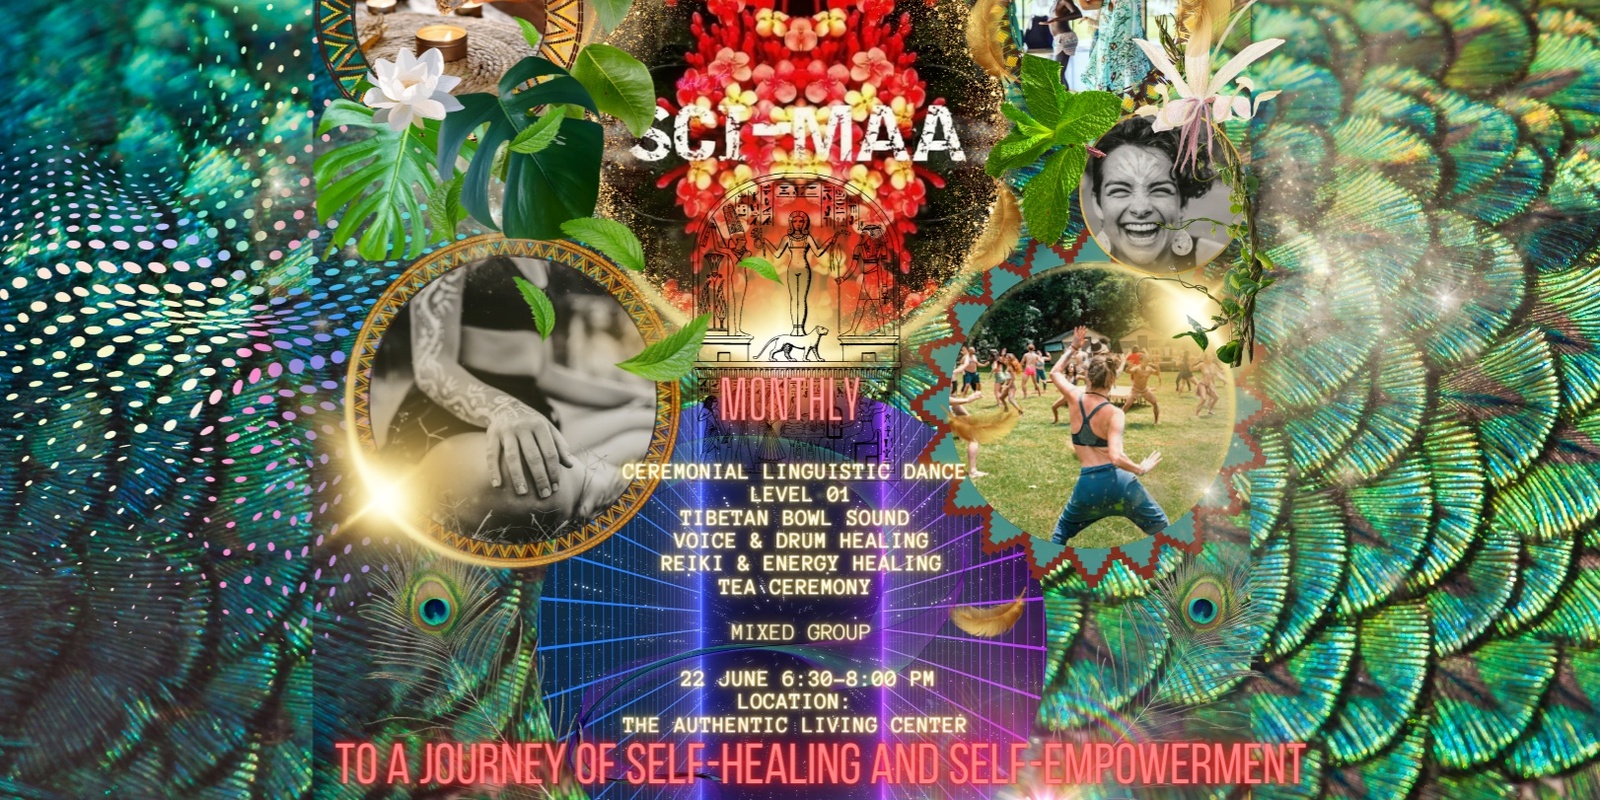 SCI-MAA - A journey of Self-Healing and Empowerment -  Monthly Event (Mixed group)